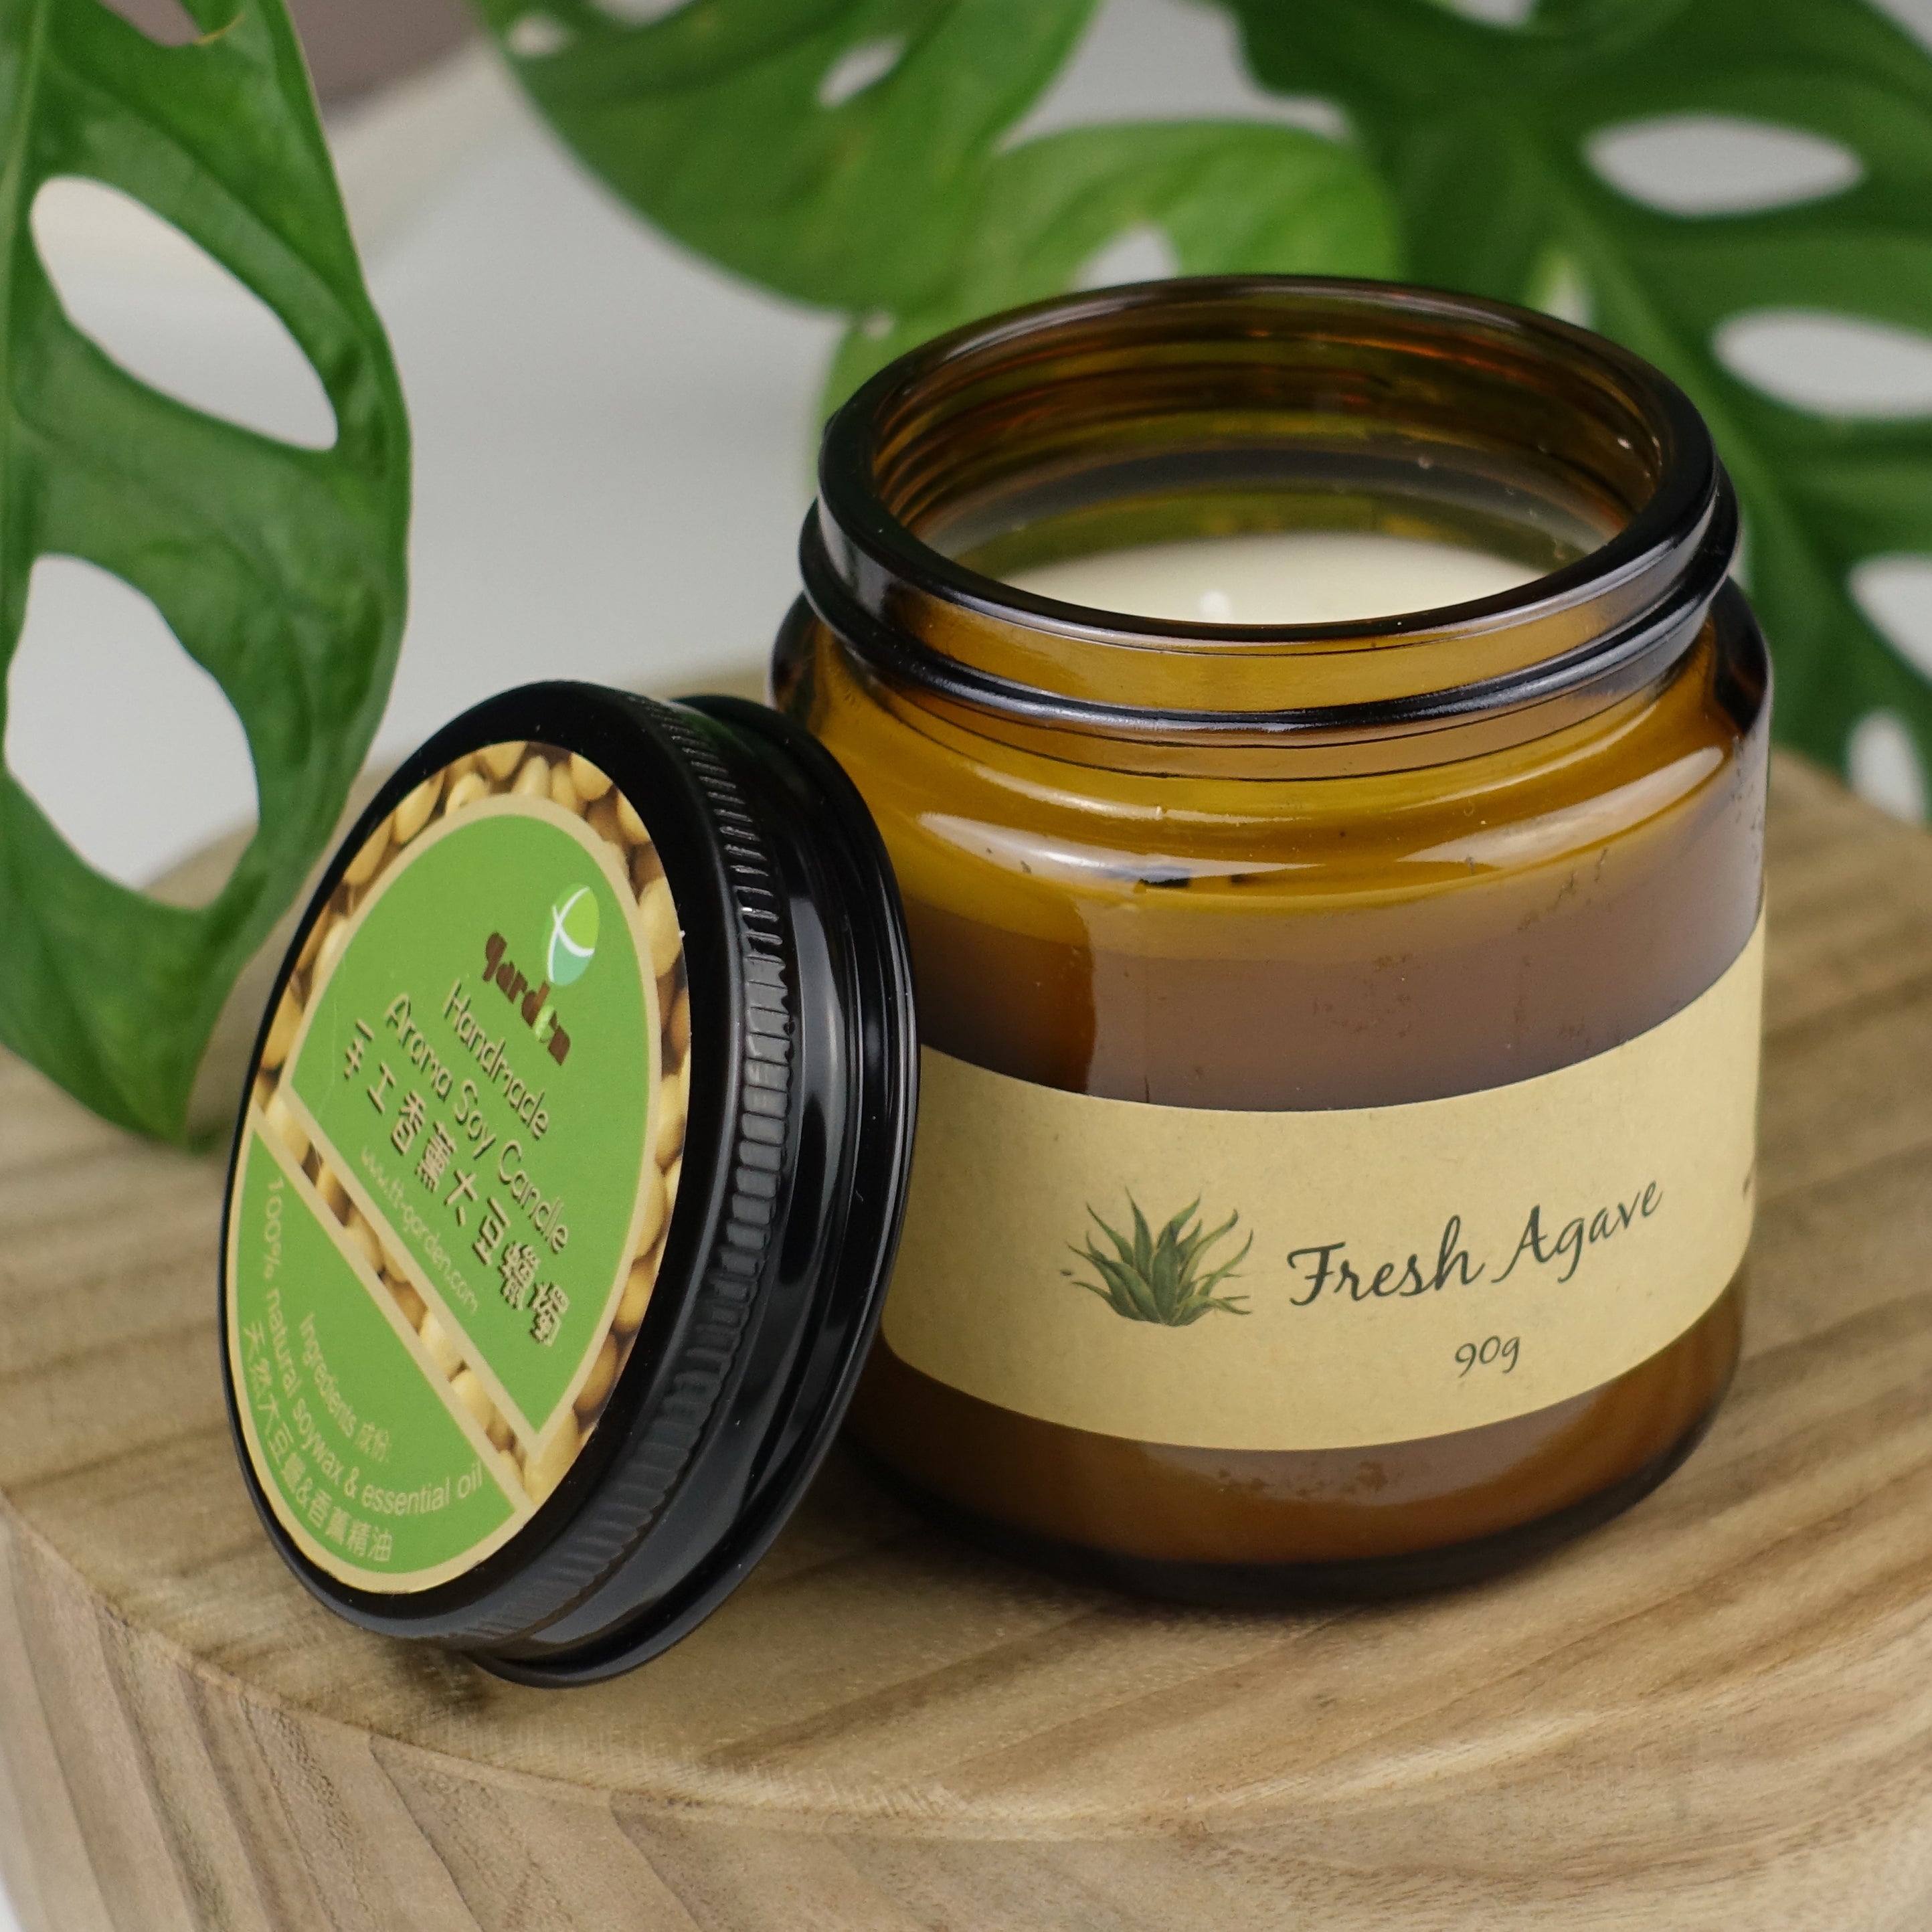 Aroma Candle Natural Handmade Soywax Candle Charmed Aroma Home Scents  Candles Set Melting Wax Scents - Fresh Agave 90g – TT-Garden